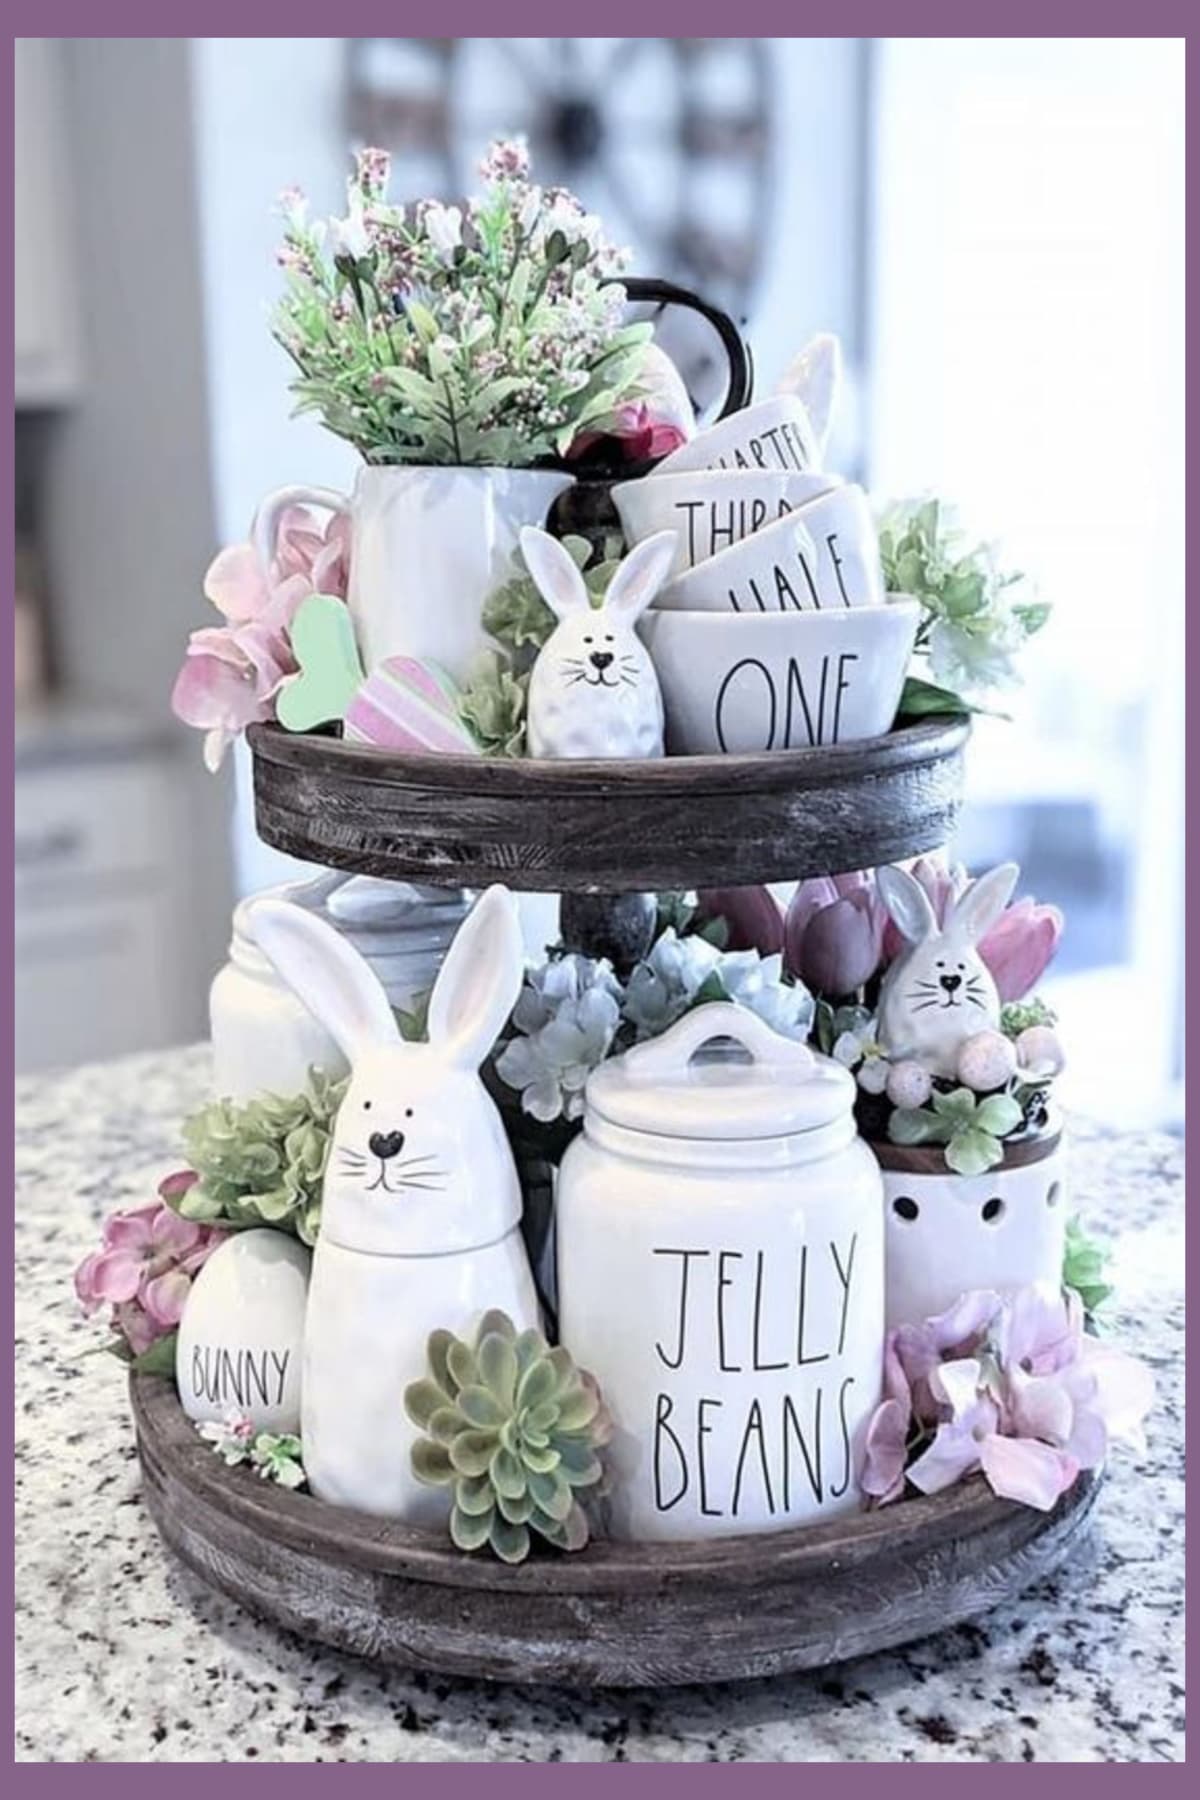 Spring decor ideas - Easter tiered wooden tray for a Springtime centerpiece decoration